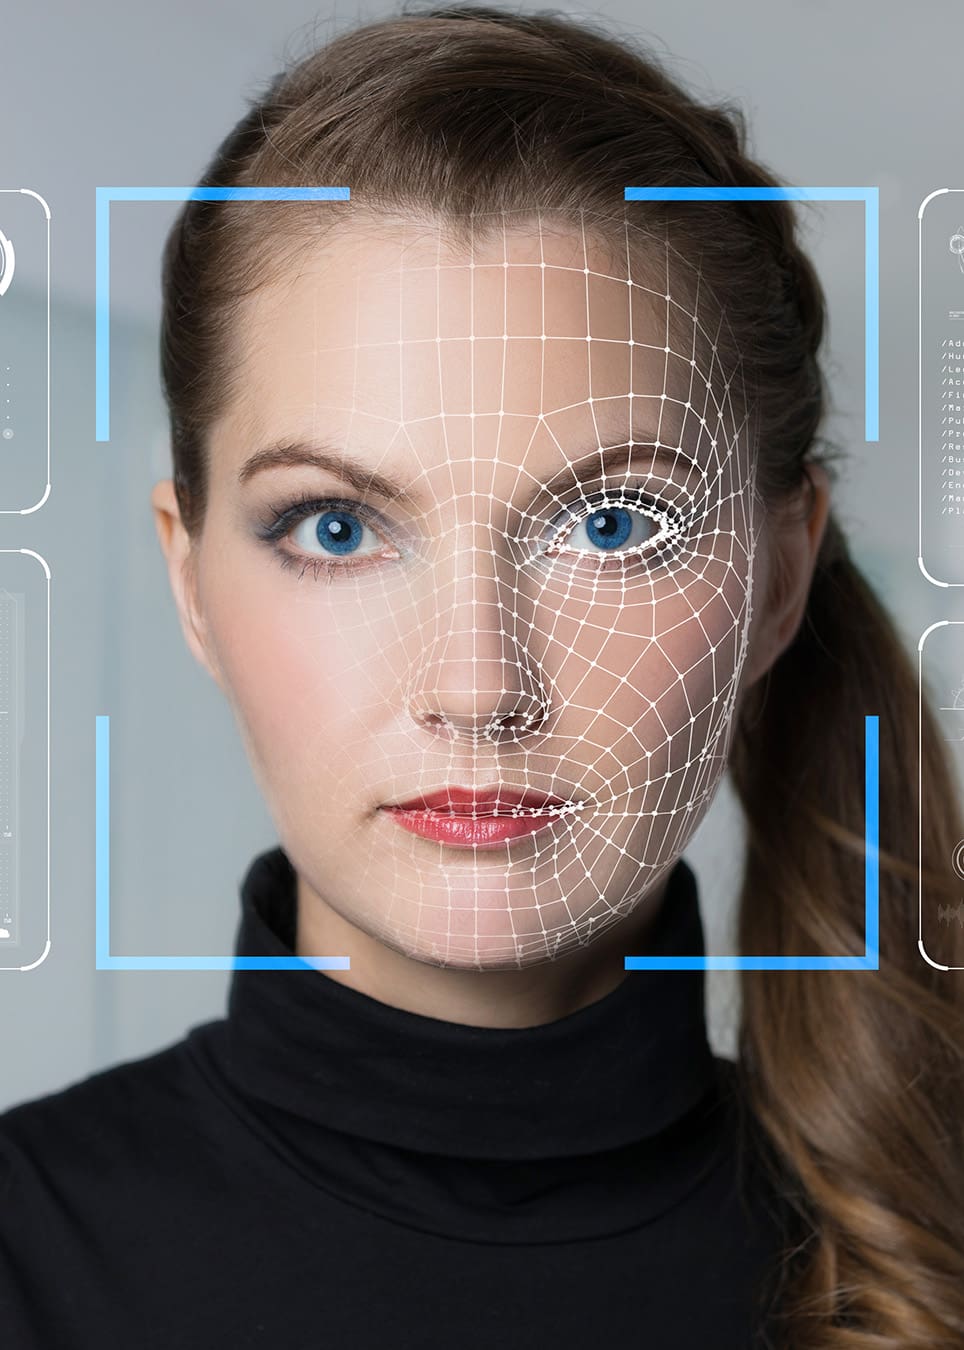 AI learning a woman's face to use in deepfakes.